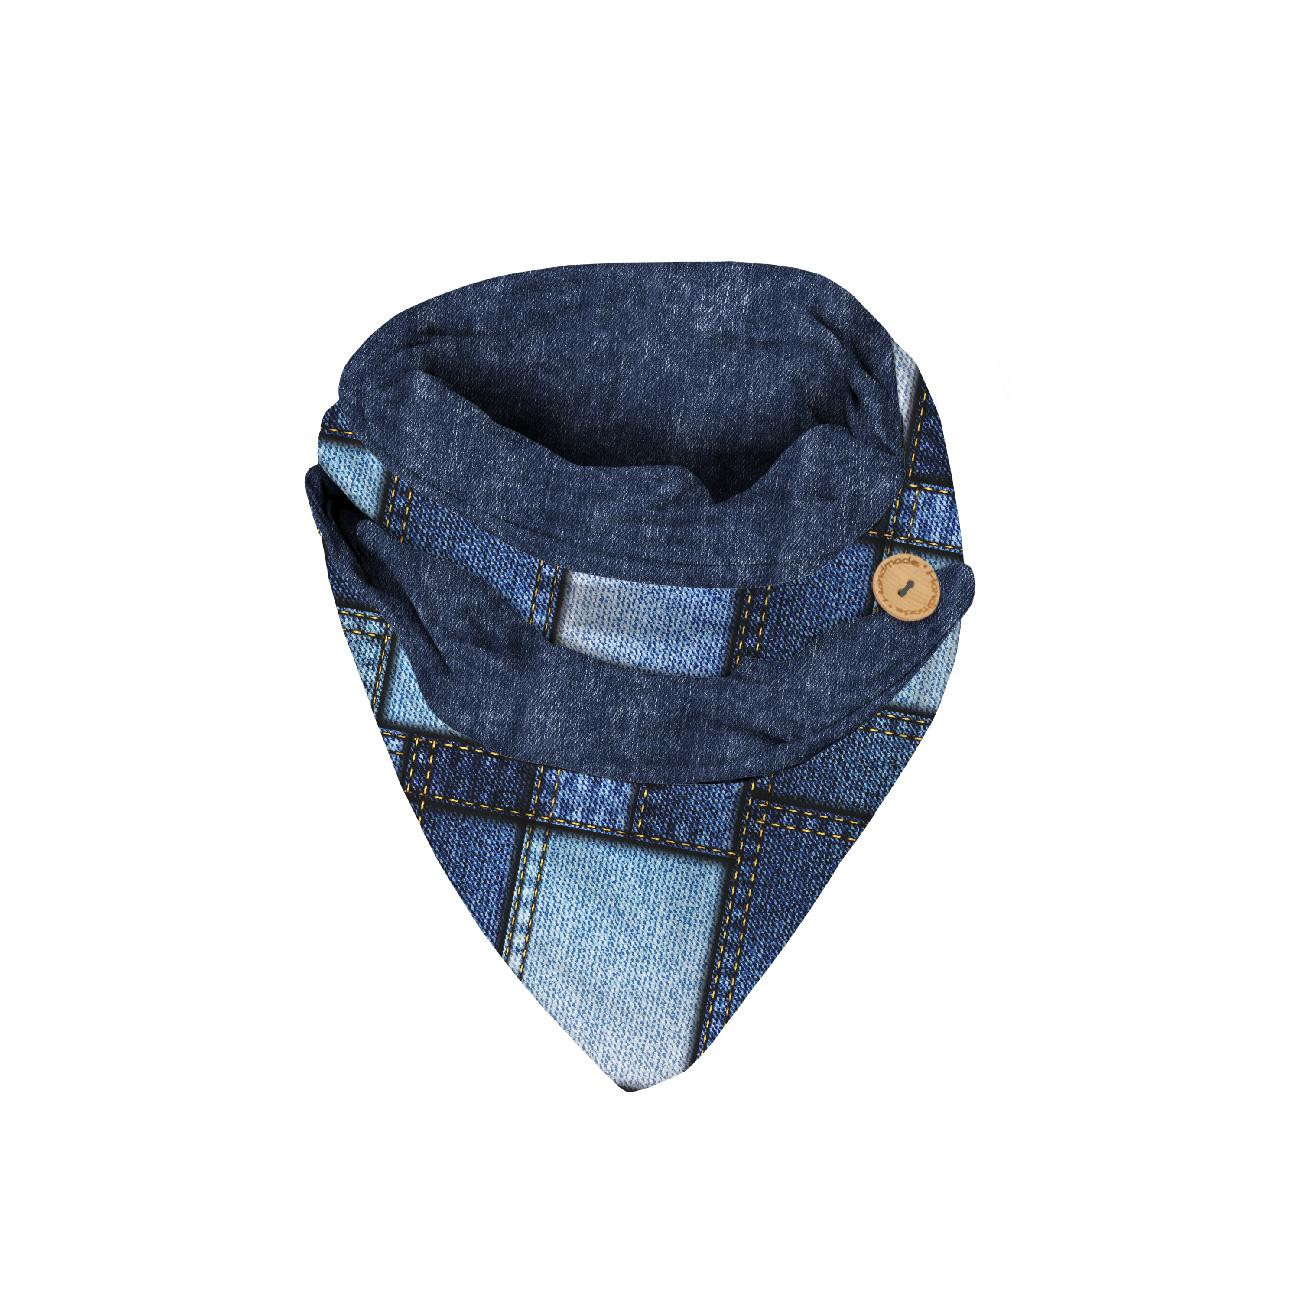 BUTTON SCARF - JEANS PATCHES (dark blue) - sewing set